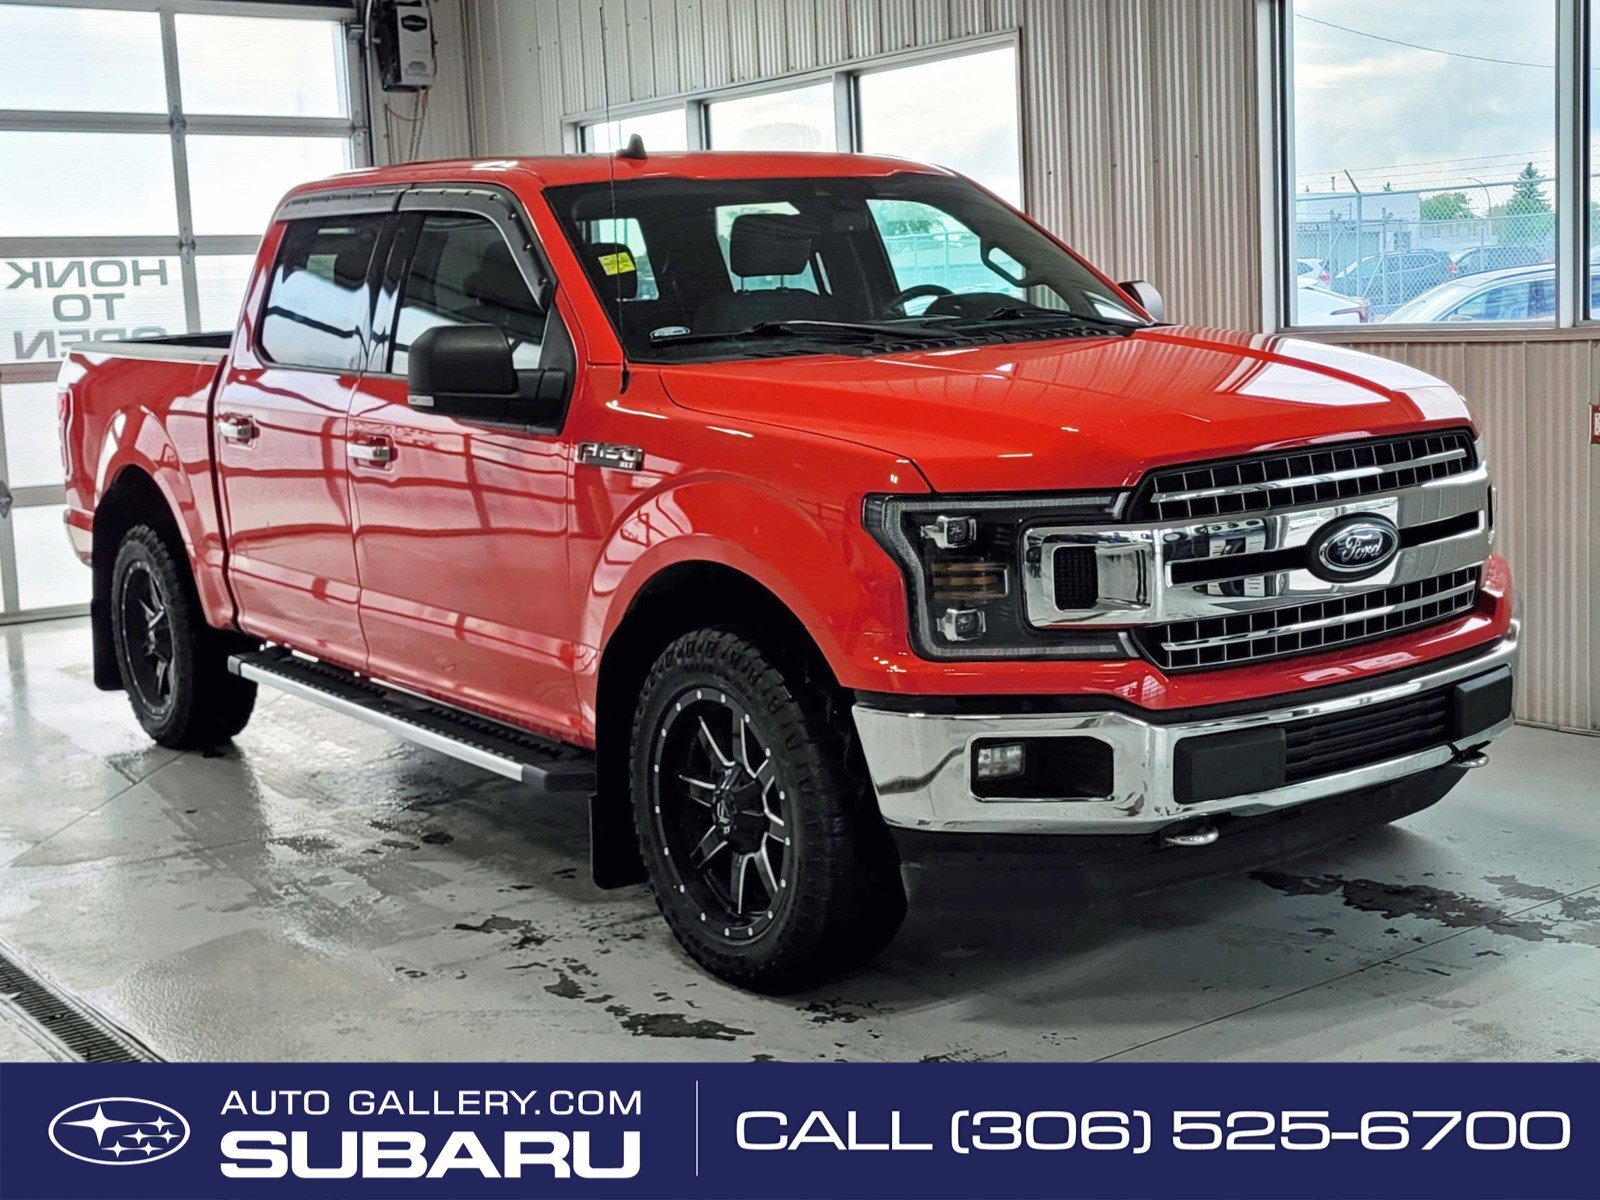 2020 Ford F-150 XLT 4X4 | PANORAMIC ROOF | SIRIUSXM